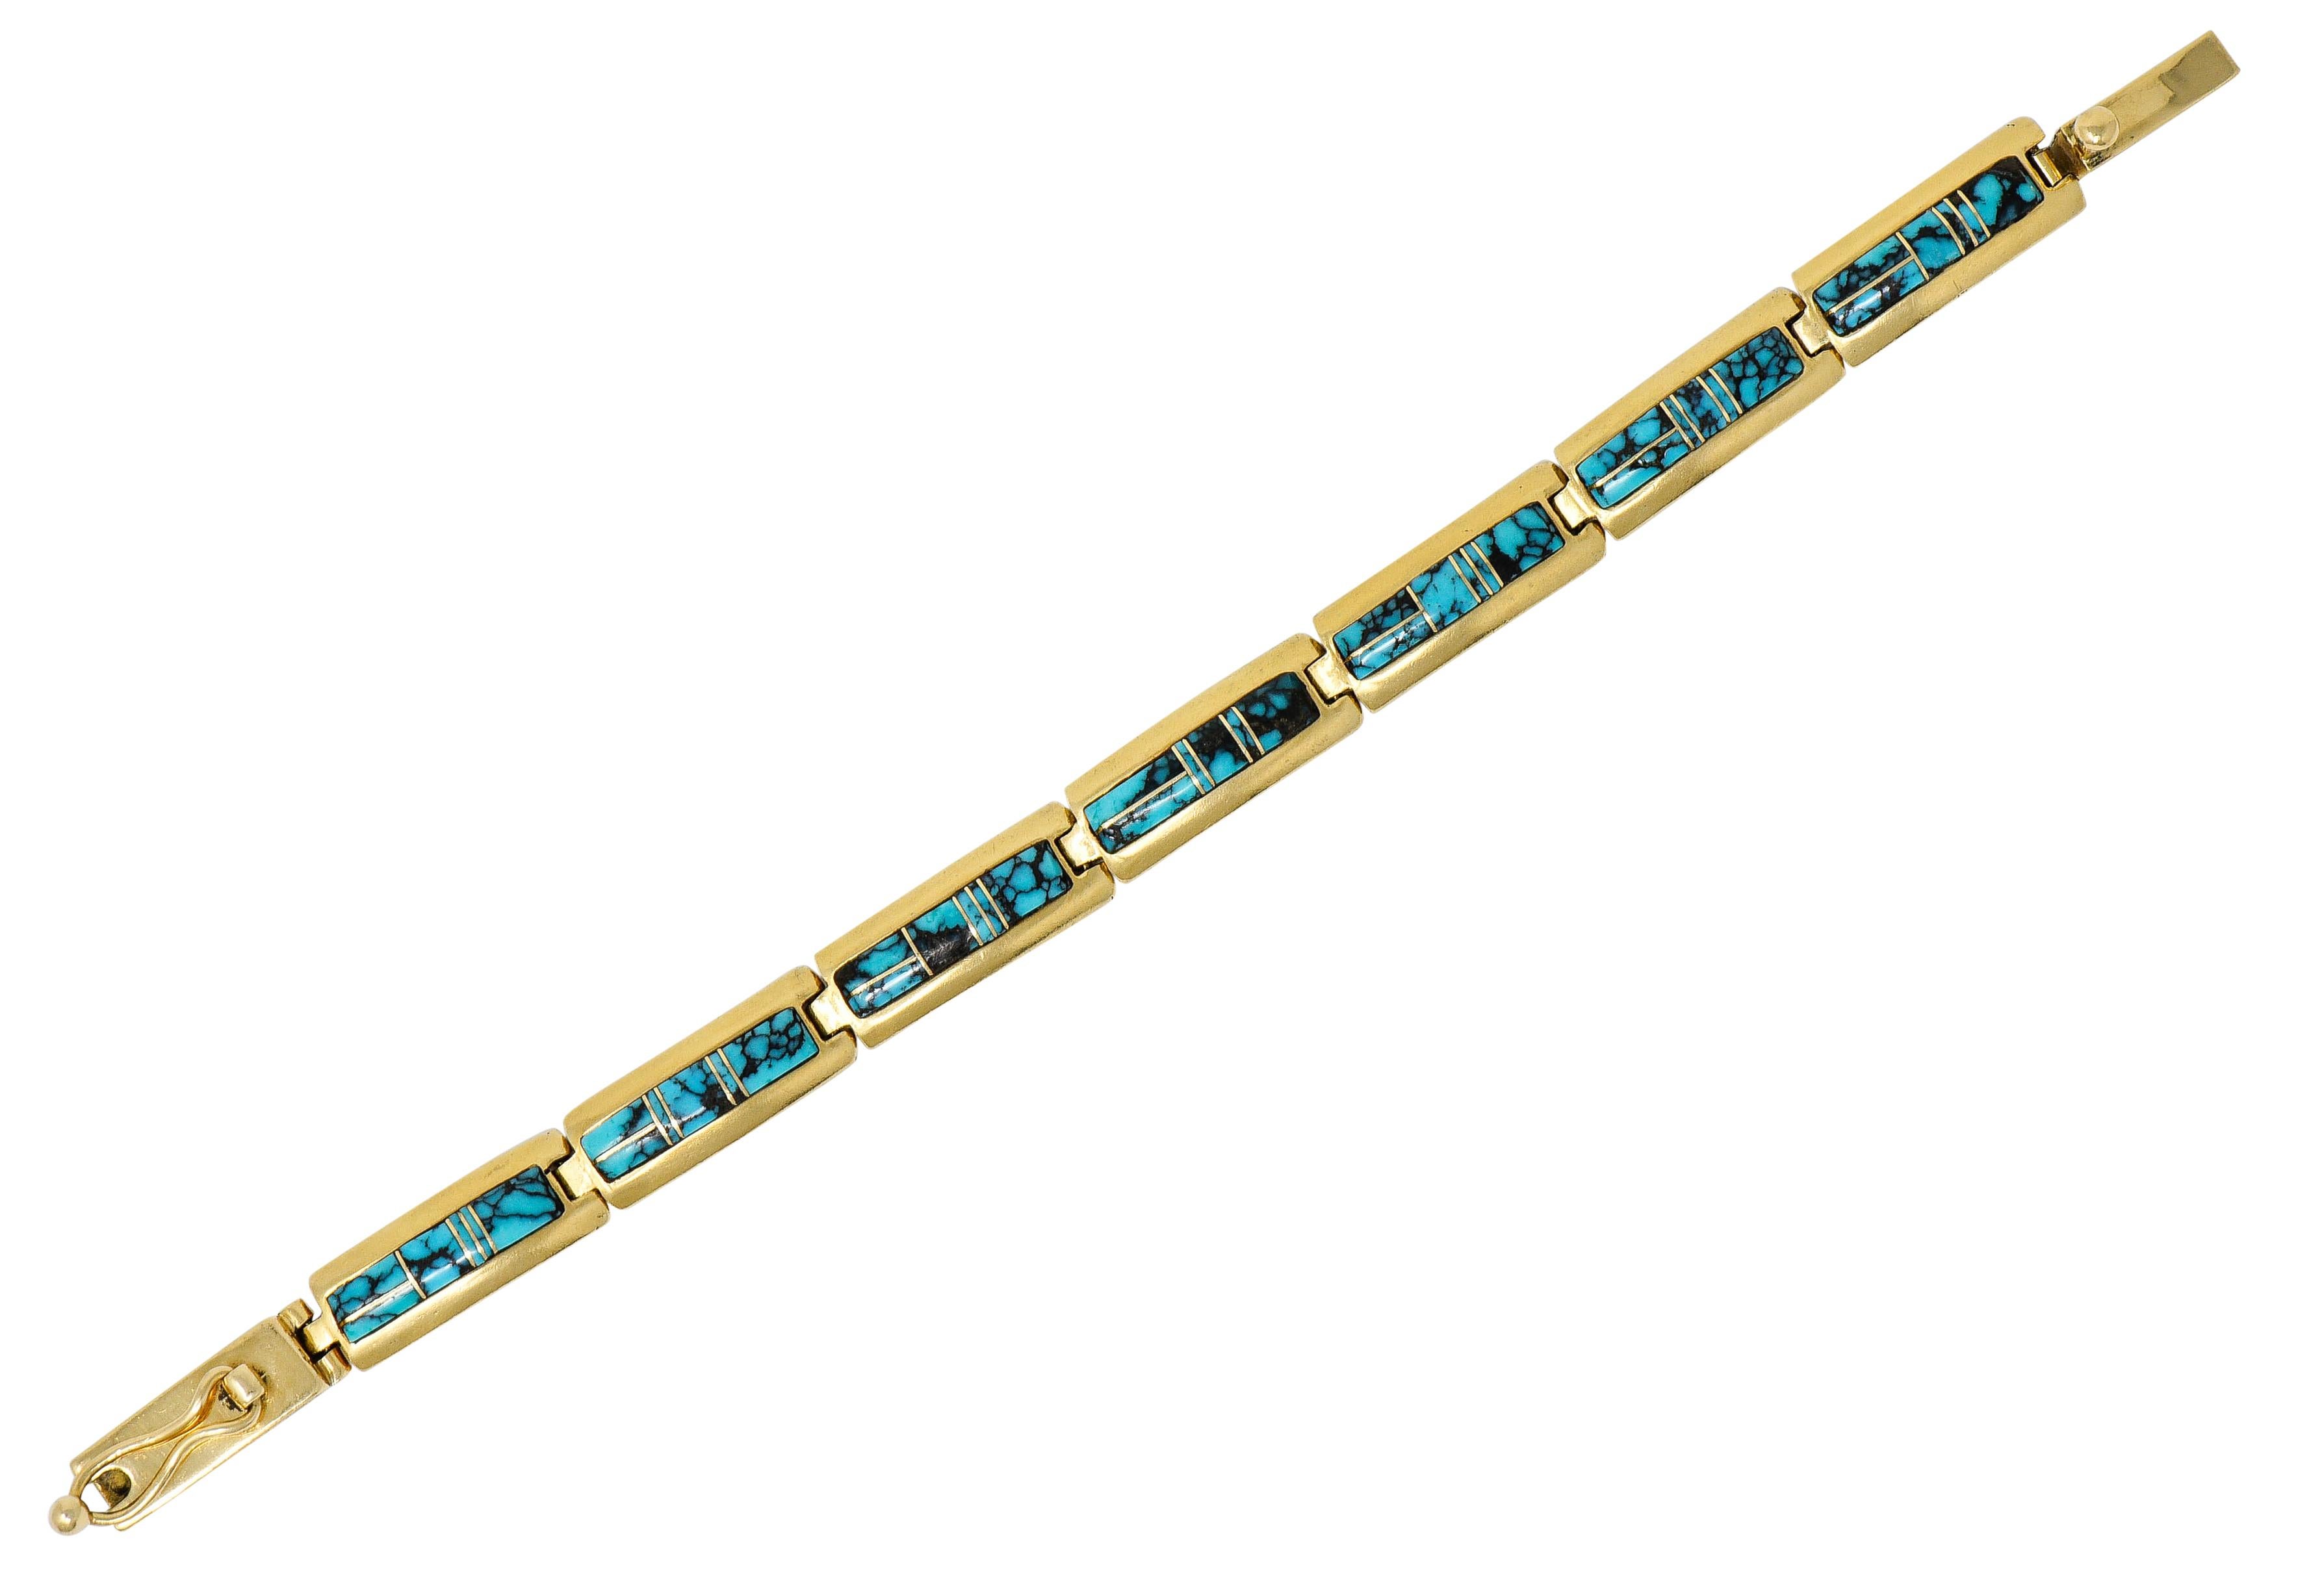 Bracelet is comprised of rectangular links inlaid with turquoise

Opaque and greenish-blue in color with black matrix veining throughout

Turquoise is accented by polished gold lines forming a geometric motif

Completed by a concealed clasp with a